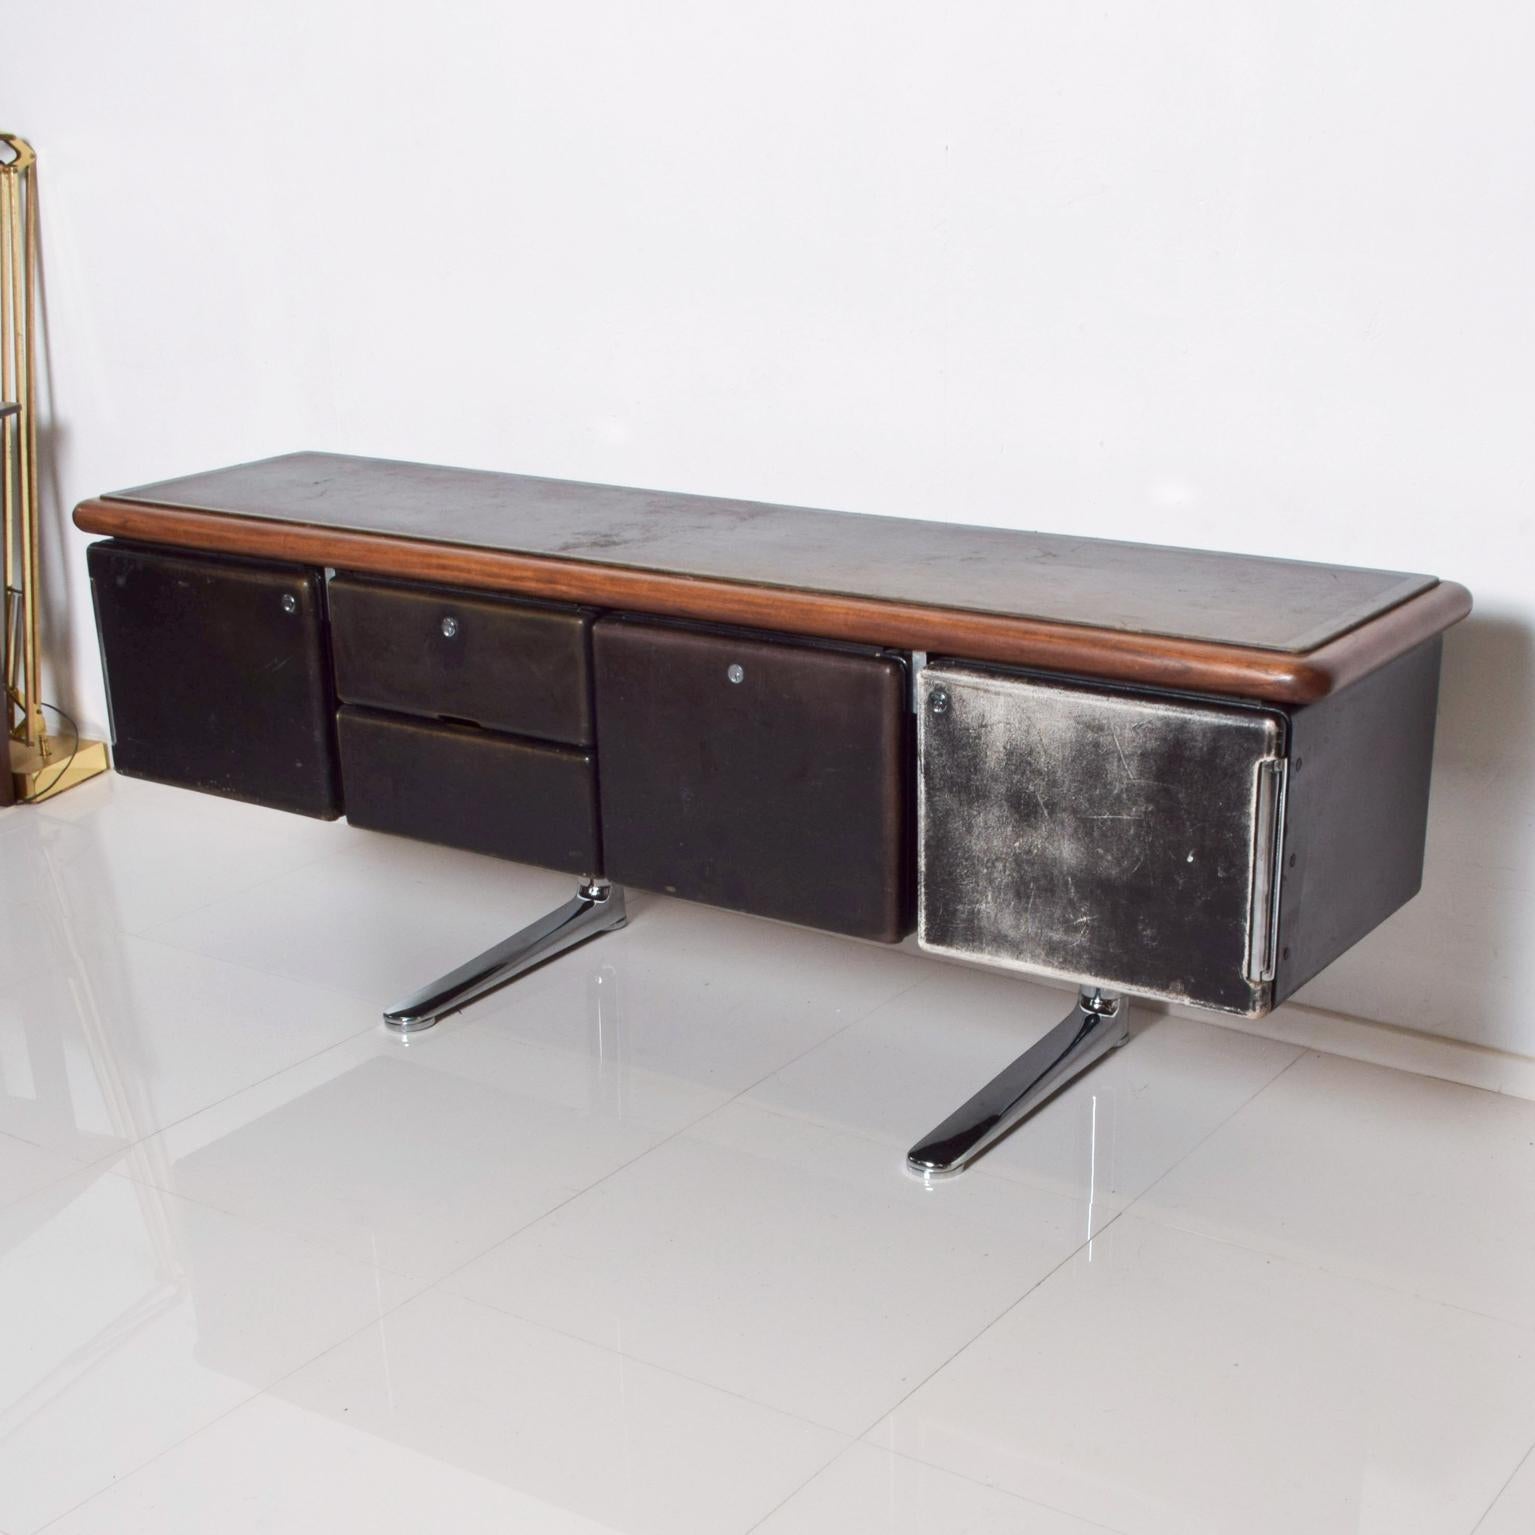 For your consideration: 1965 massive peather sideboard credenza vintage Warren Platner for Knoll International Platner Executive Collection 1960s. 
Iconic design mid century madness in all its glory. Leather, wood and chrome. Comes with key and